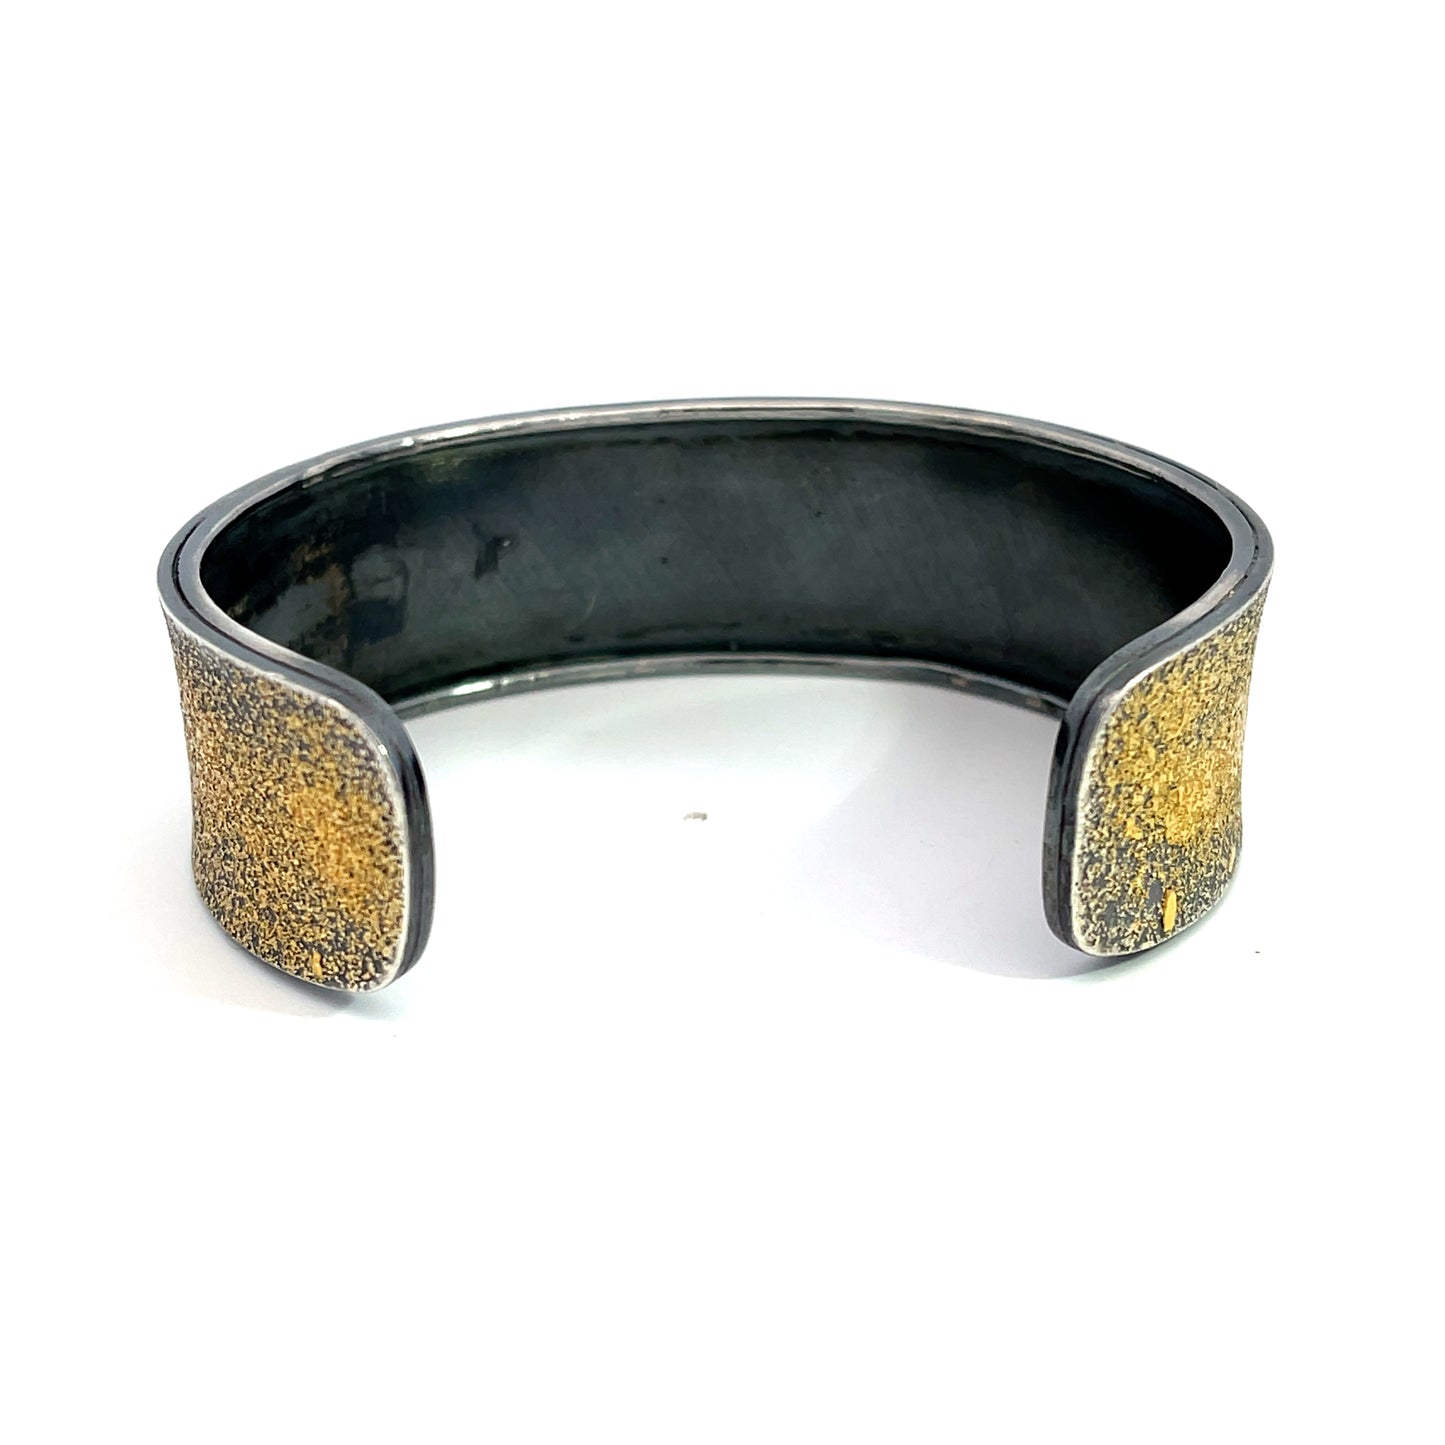 Oxidized Sterling Silver and 24k Gold "Fairy Dust" Narrow Cuff